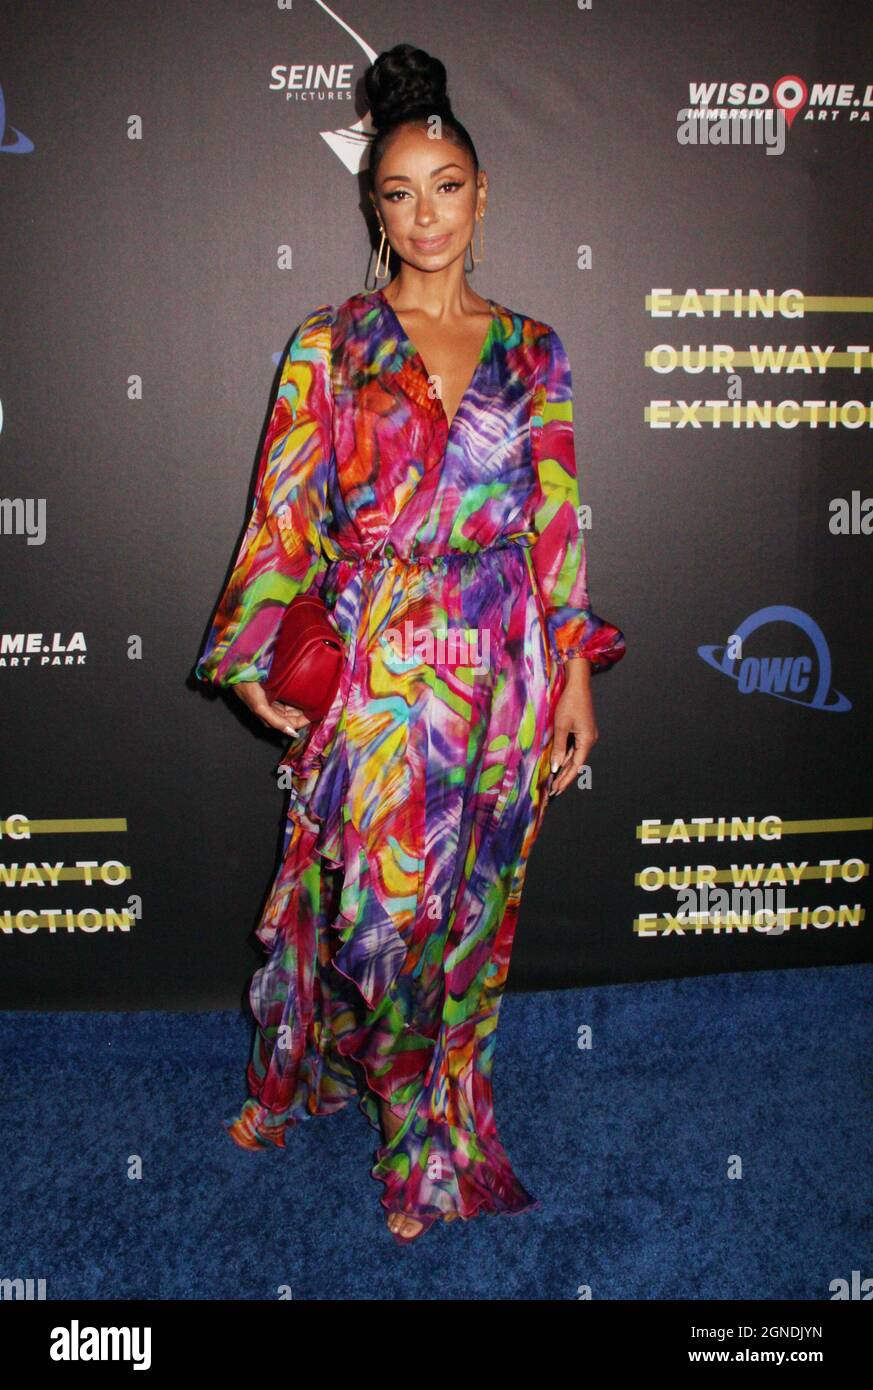 Mya  09/14/2021 The world premiere of "Eating Our Way To Extinction" at Wisdome L.A. in Los Angeles, CA Photo by Izumi Hasegawa / HollywoodNewsWire.net Stock Photo